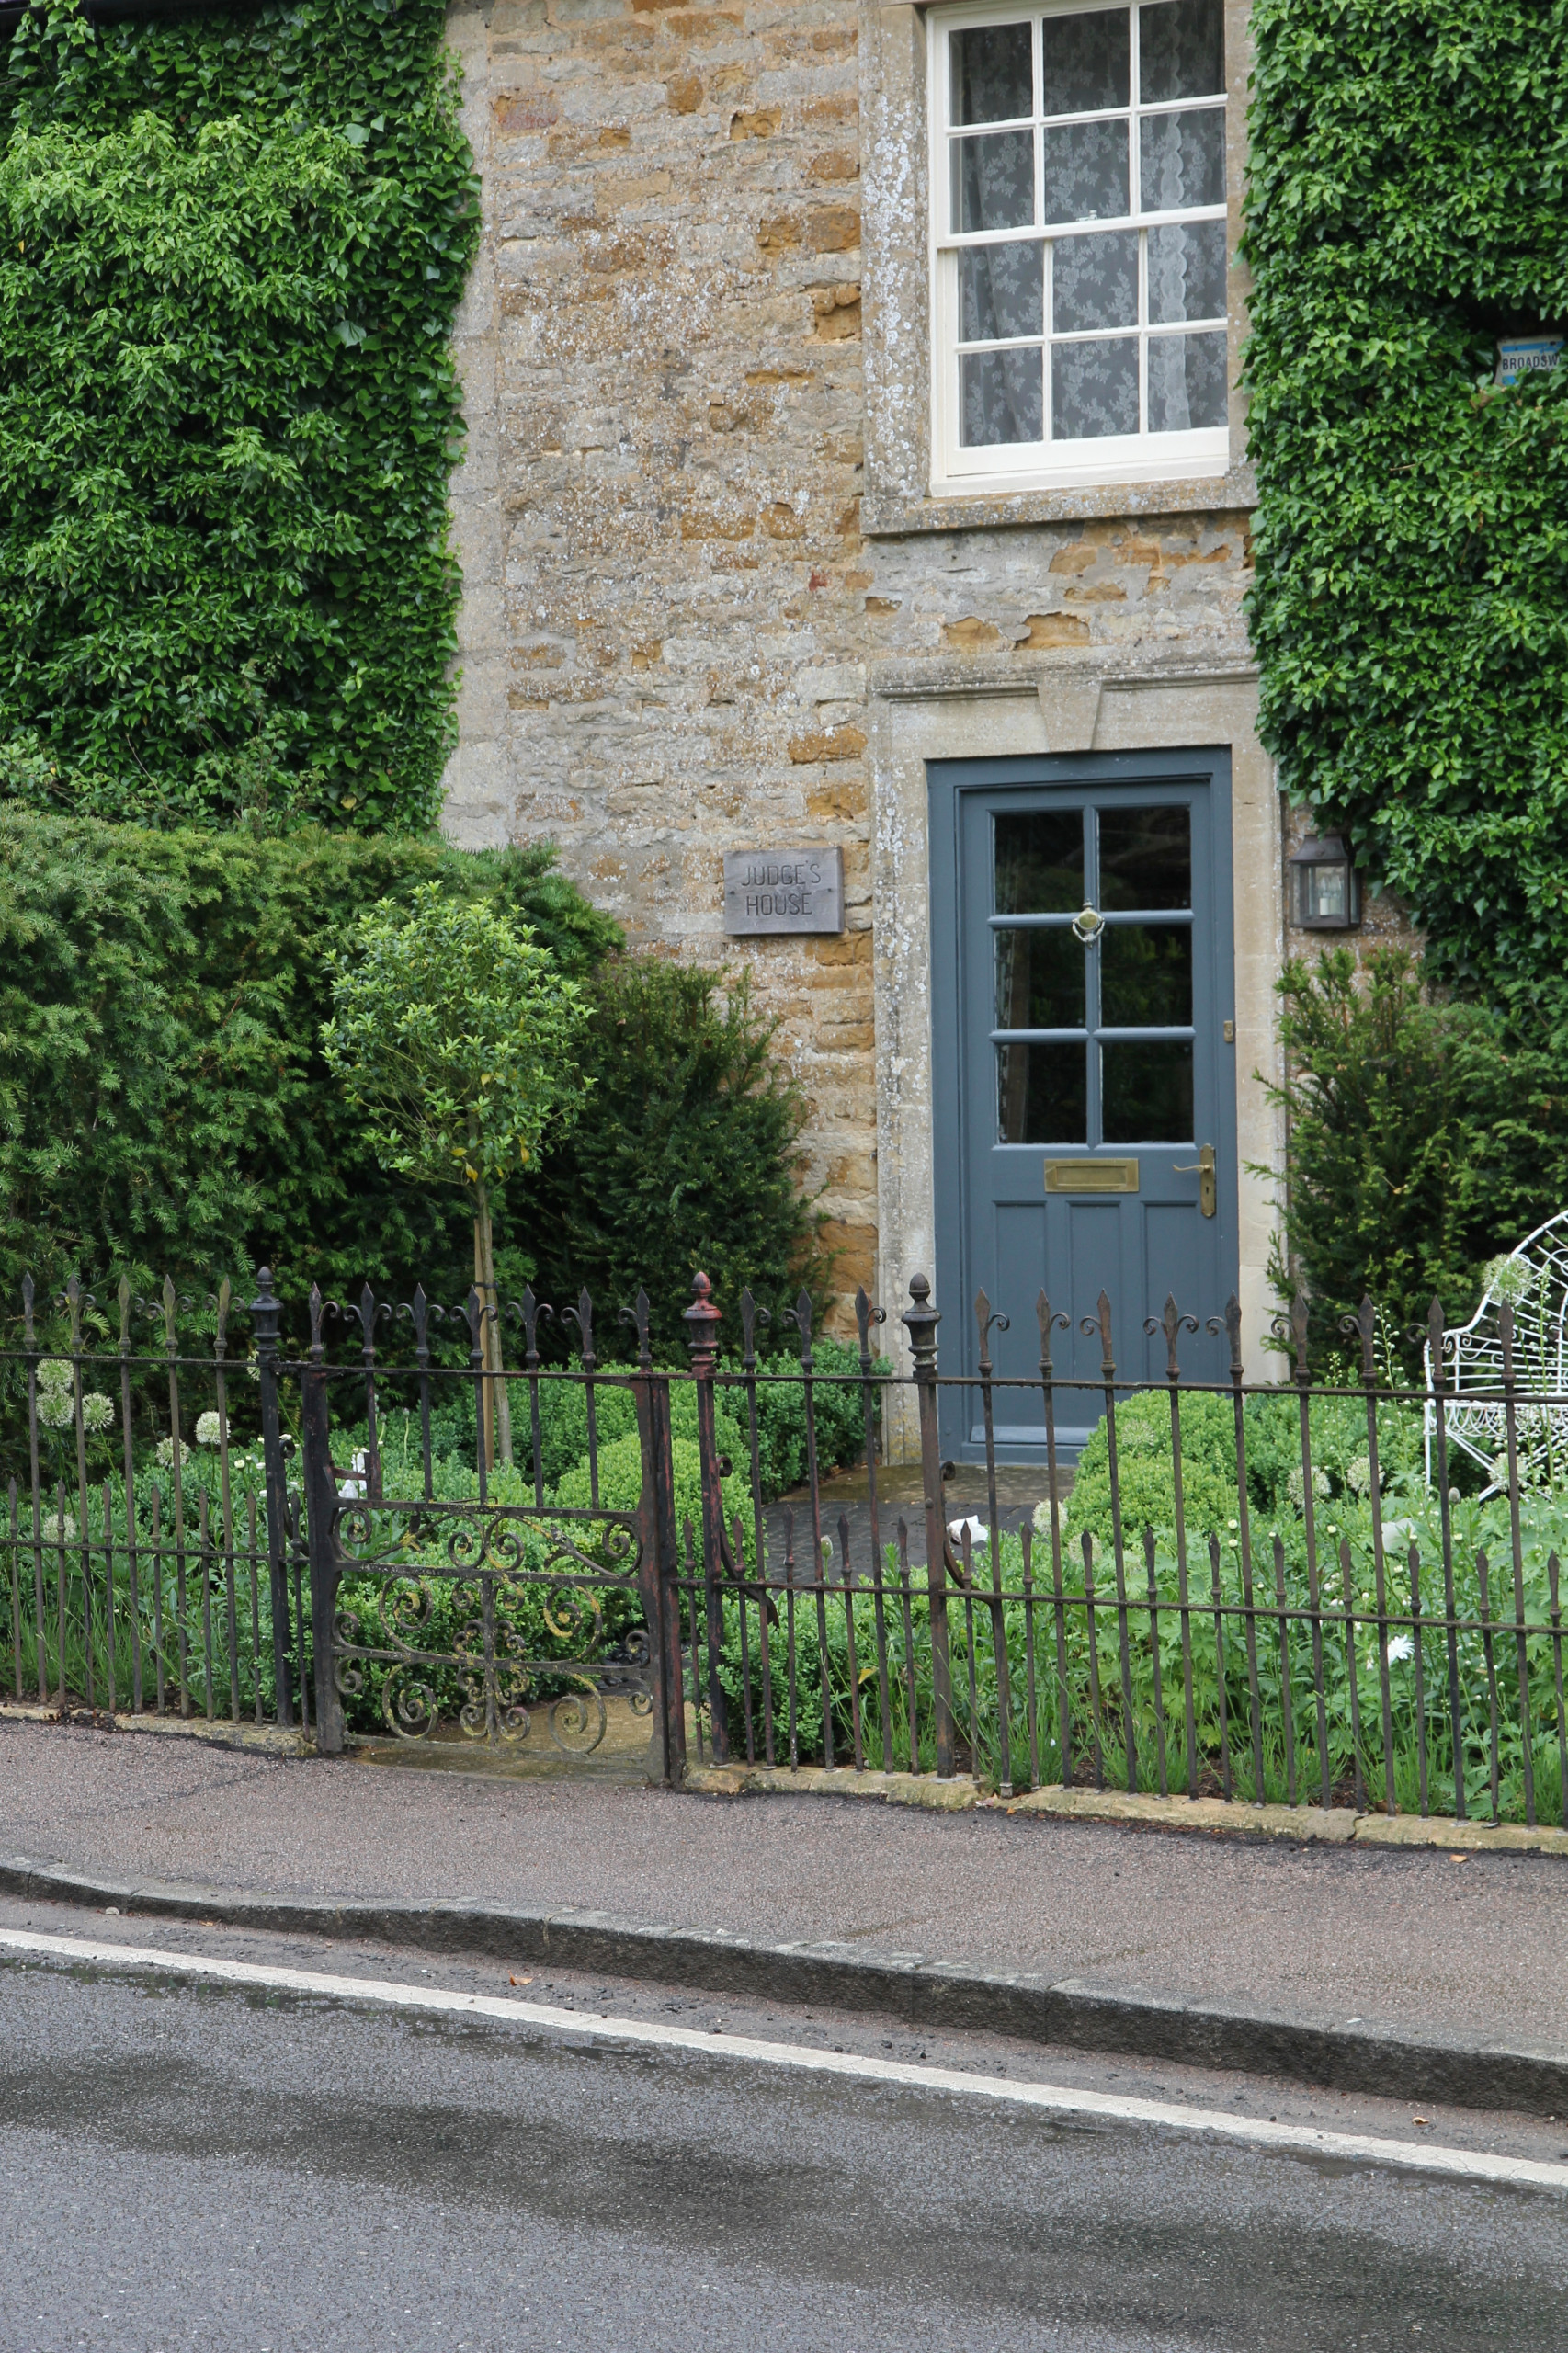  Design Ideas For Small Front Gardens Houzz Uk - Garden Designs For Small Front Gardens Uk